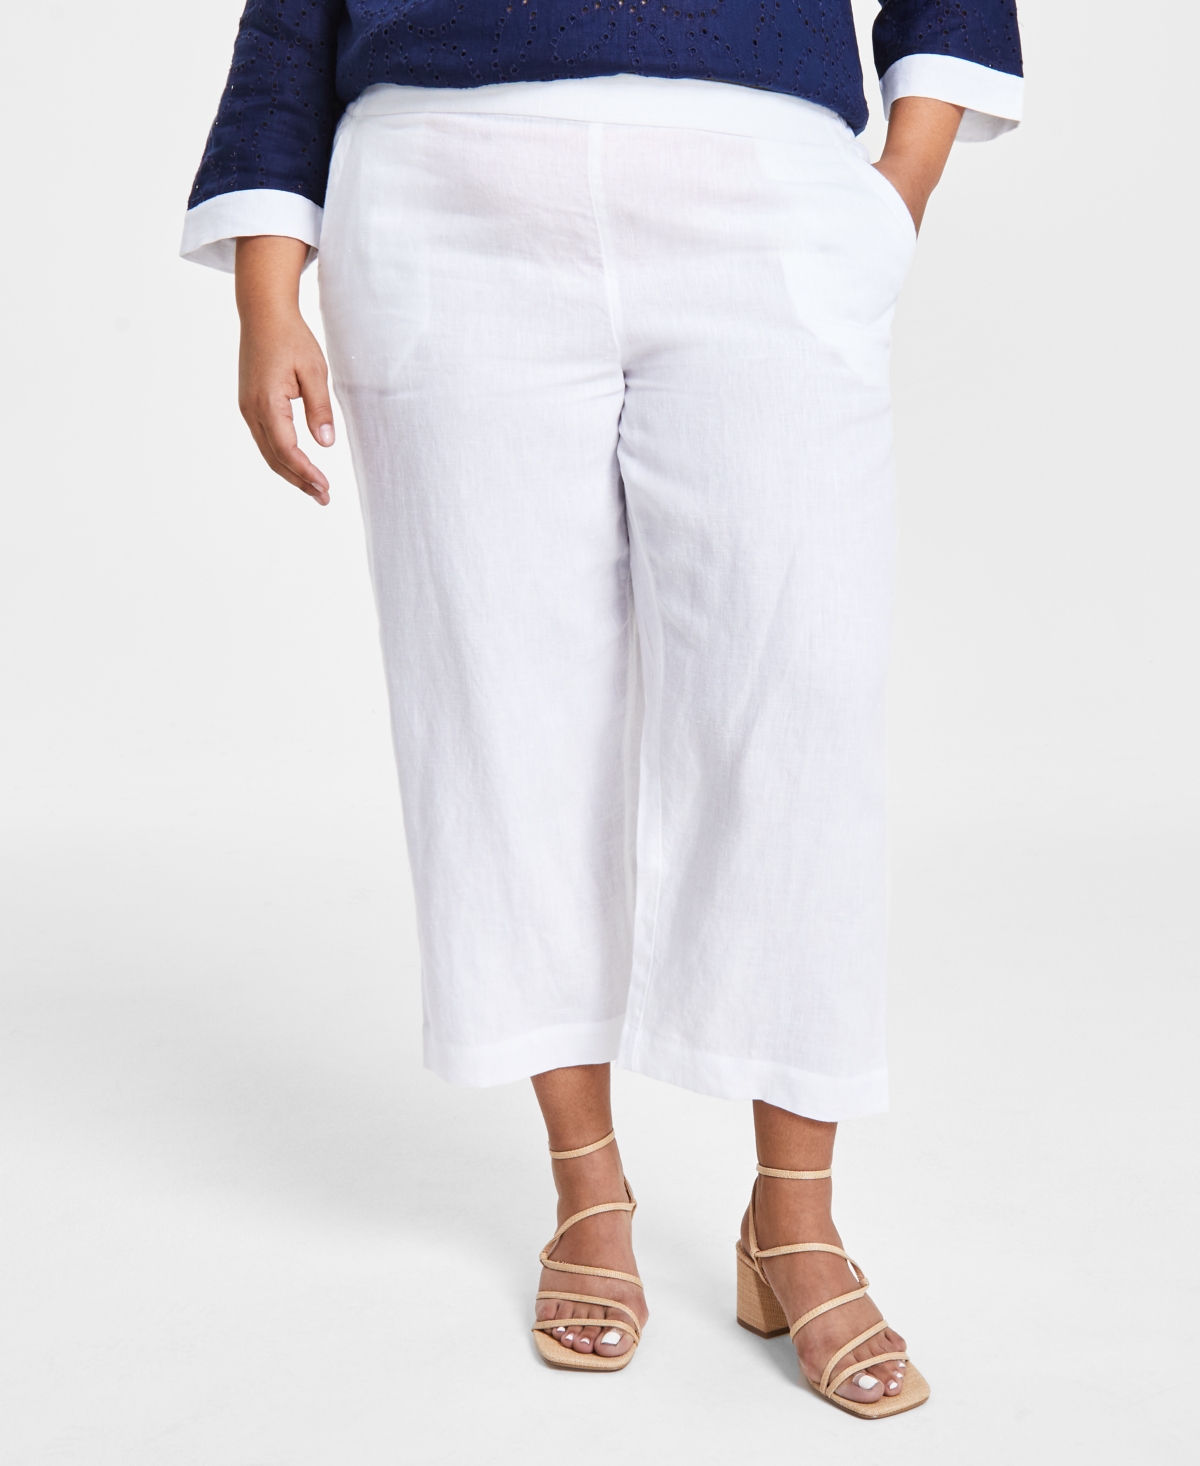 Plus Size 100% Linen Cropped Pants, Created for Macy's - Bright White